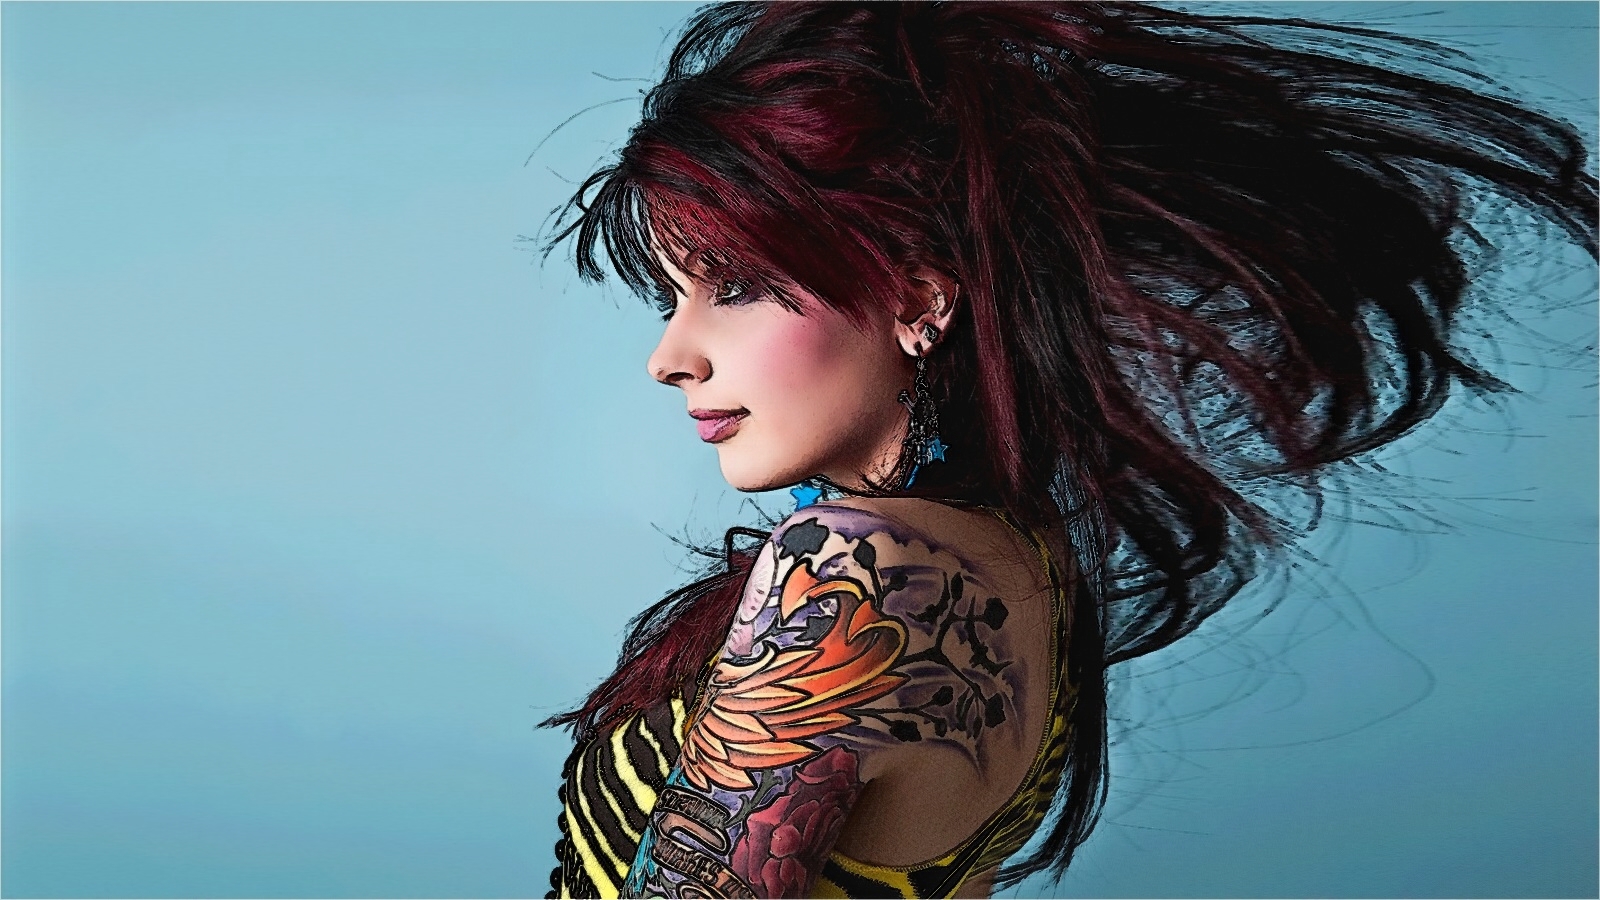 tattooed women wallpaper,hair,hairstyle,hair coloring,beauty,tattoo